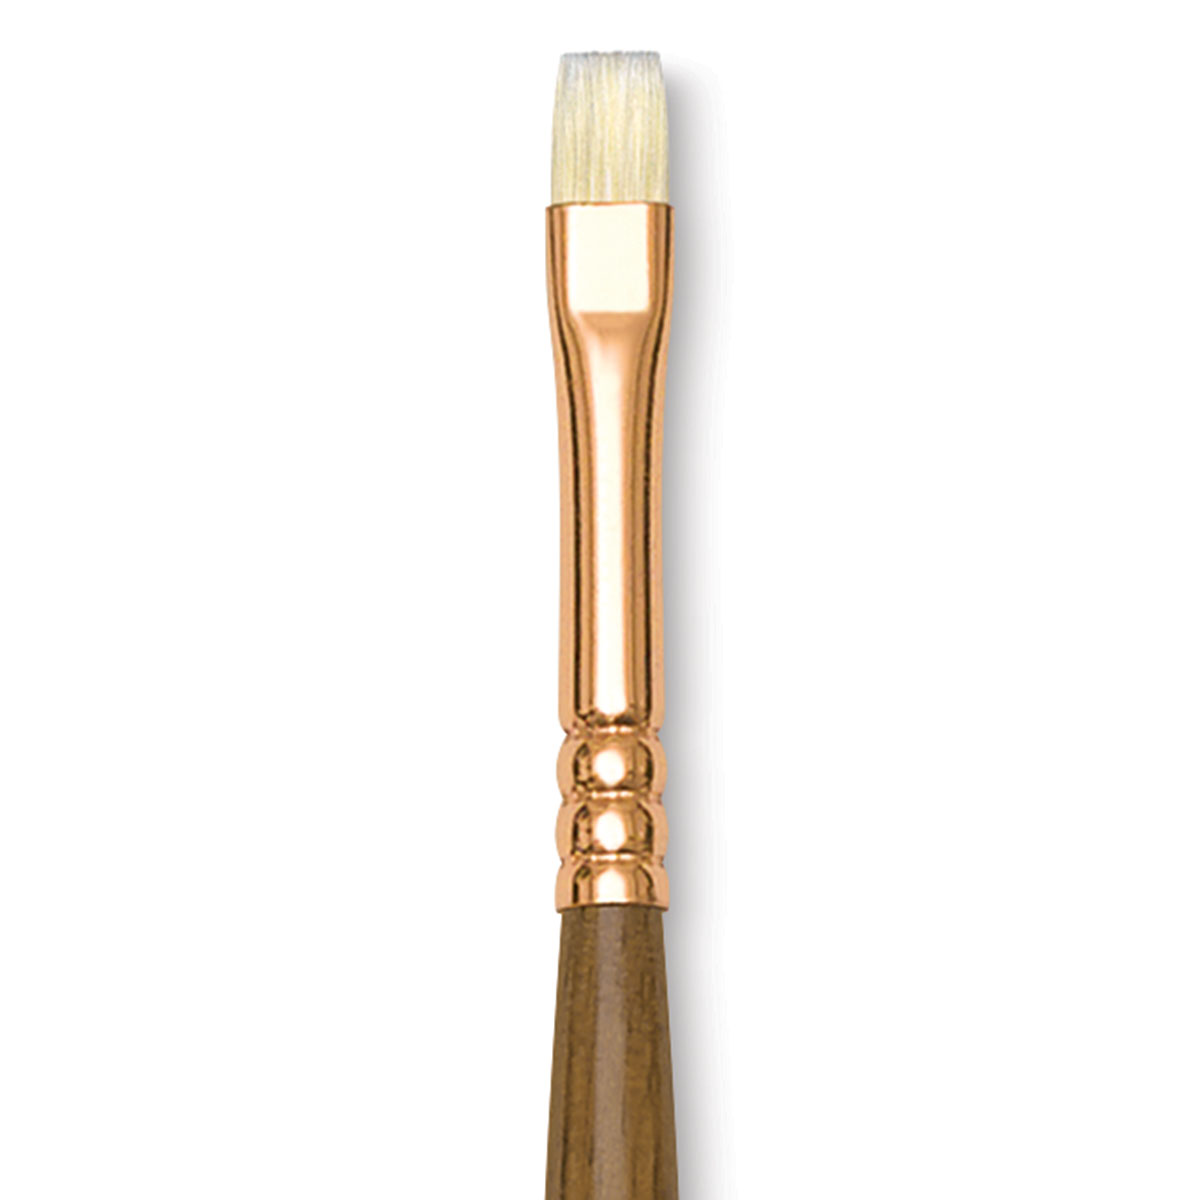 Princeton Refine Artist Brush Size 2 Brushes for Oil and Acrylic Paint Filbert Series 5400 Natural Chunking Bristle 